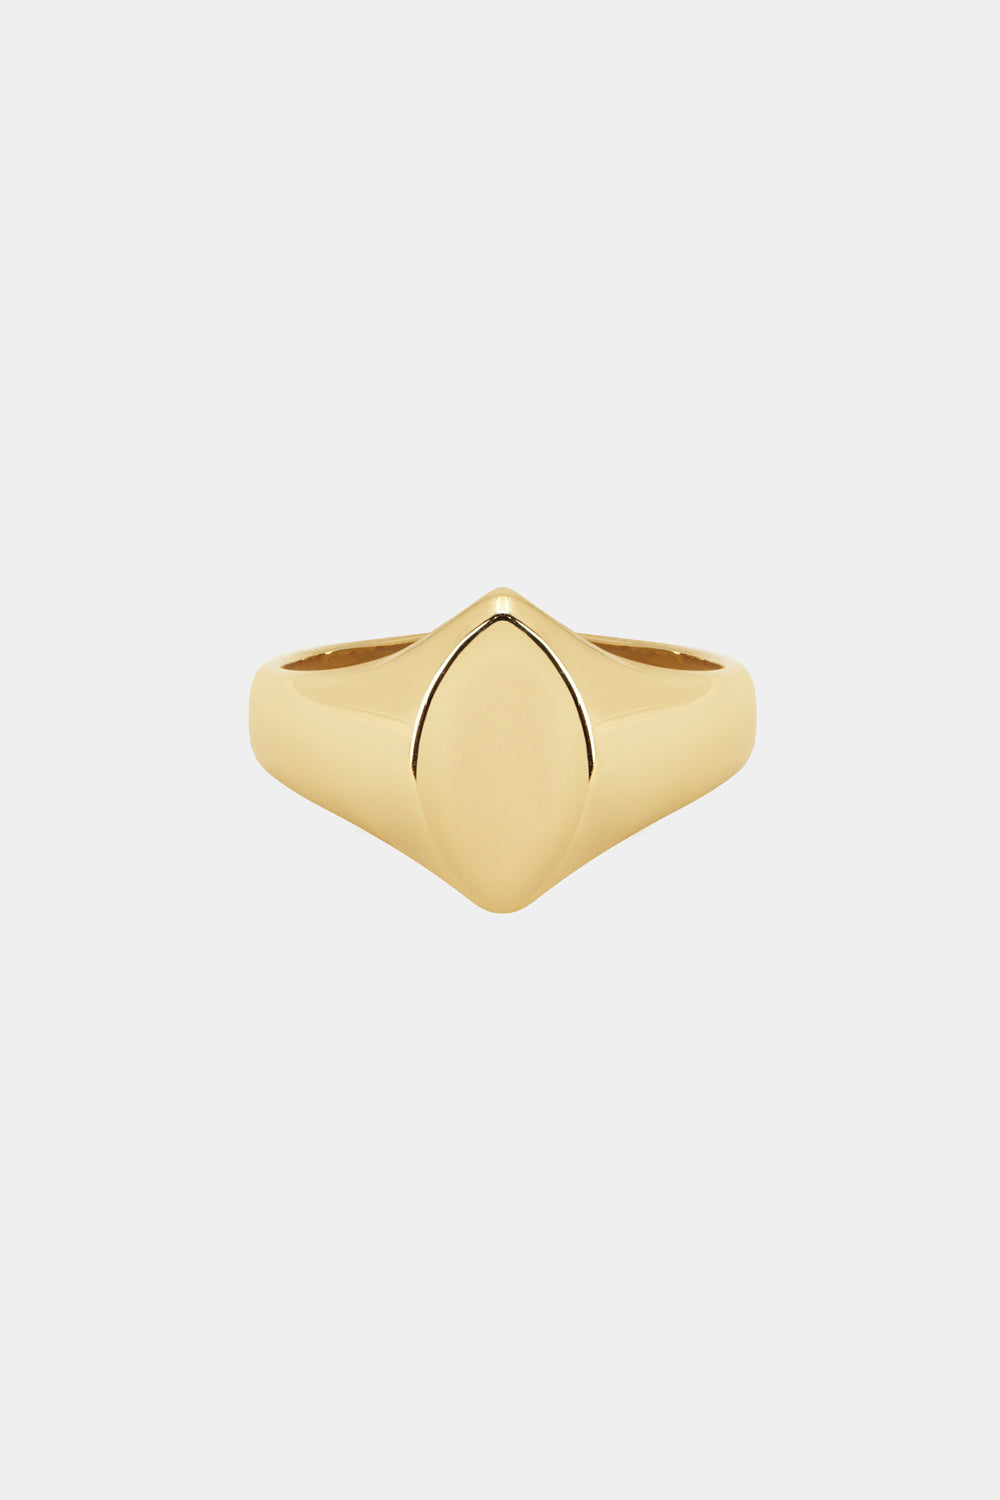 Marquise Signet Ring | Yellow Gold, More Options Available